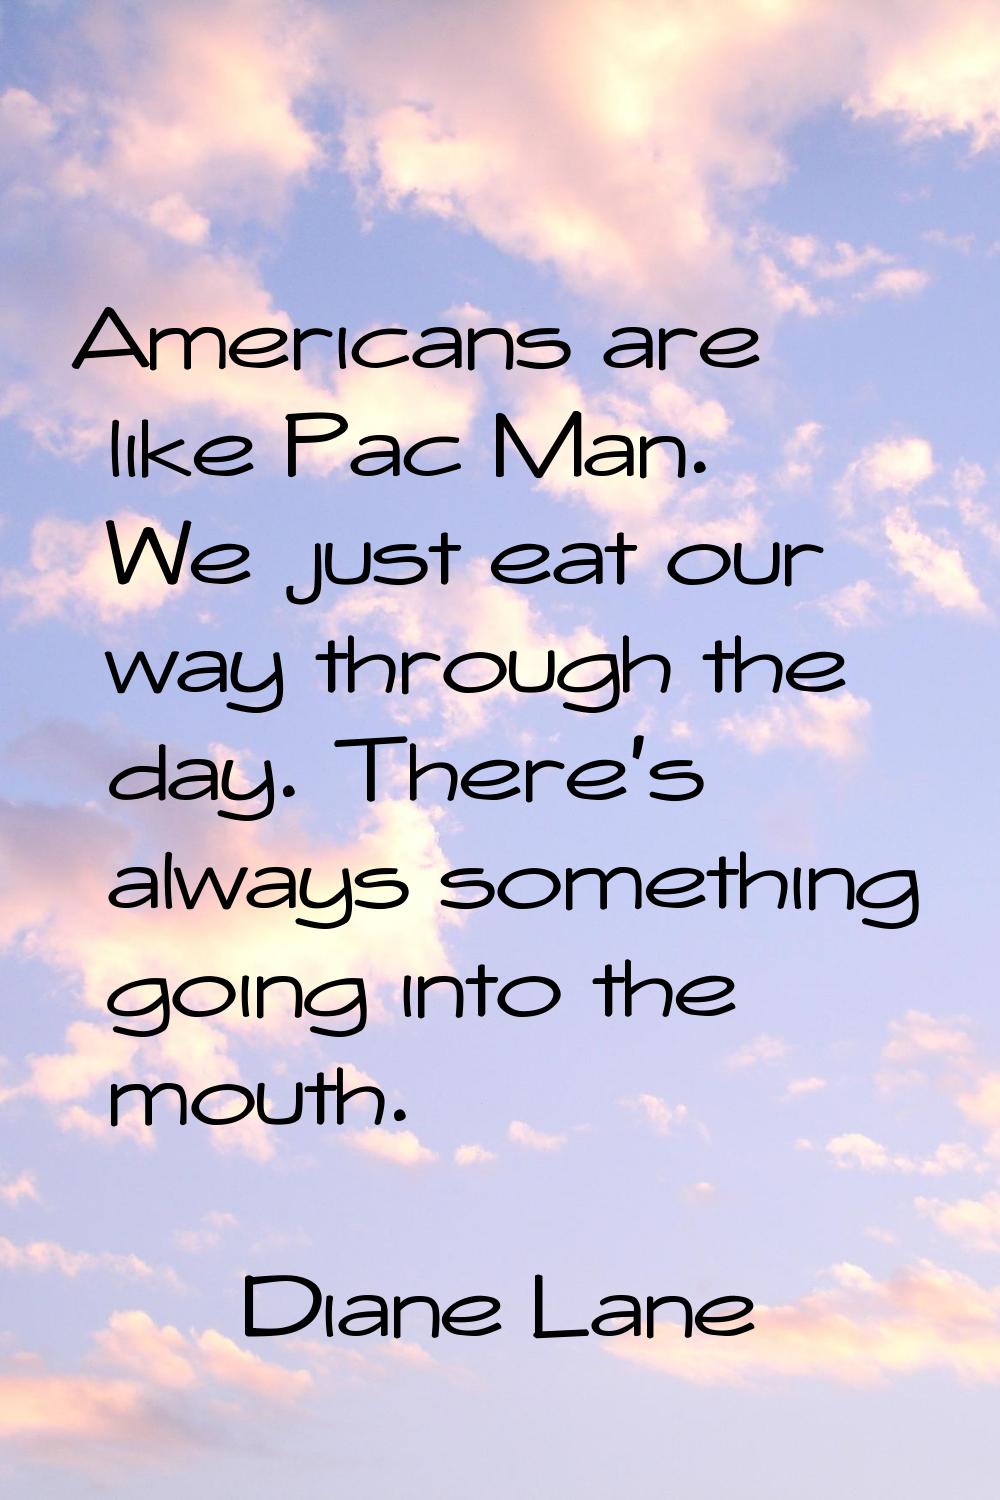 Americans are like Pac Man. We just eat our way through the day. There's always something going int